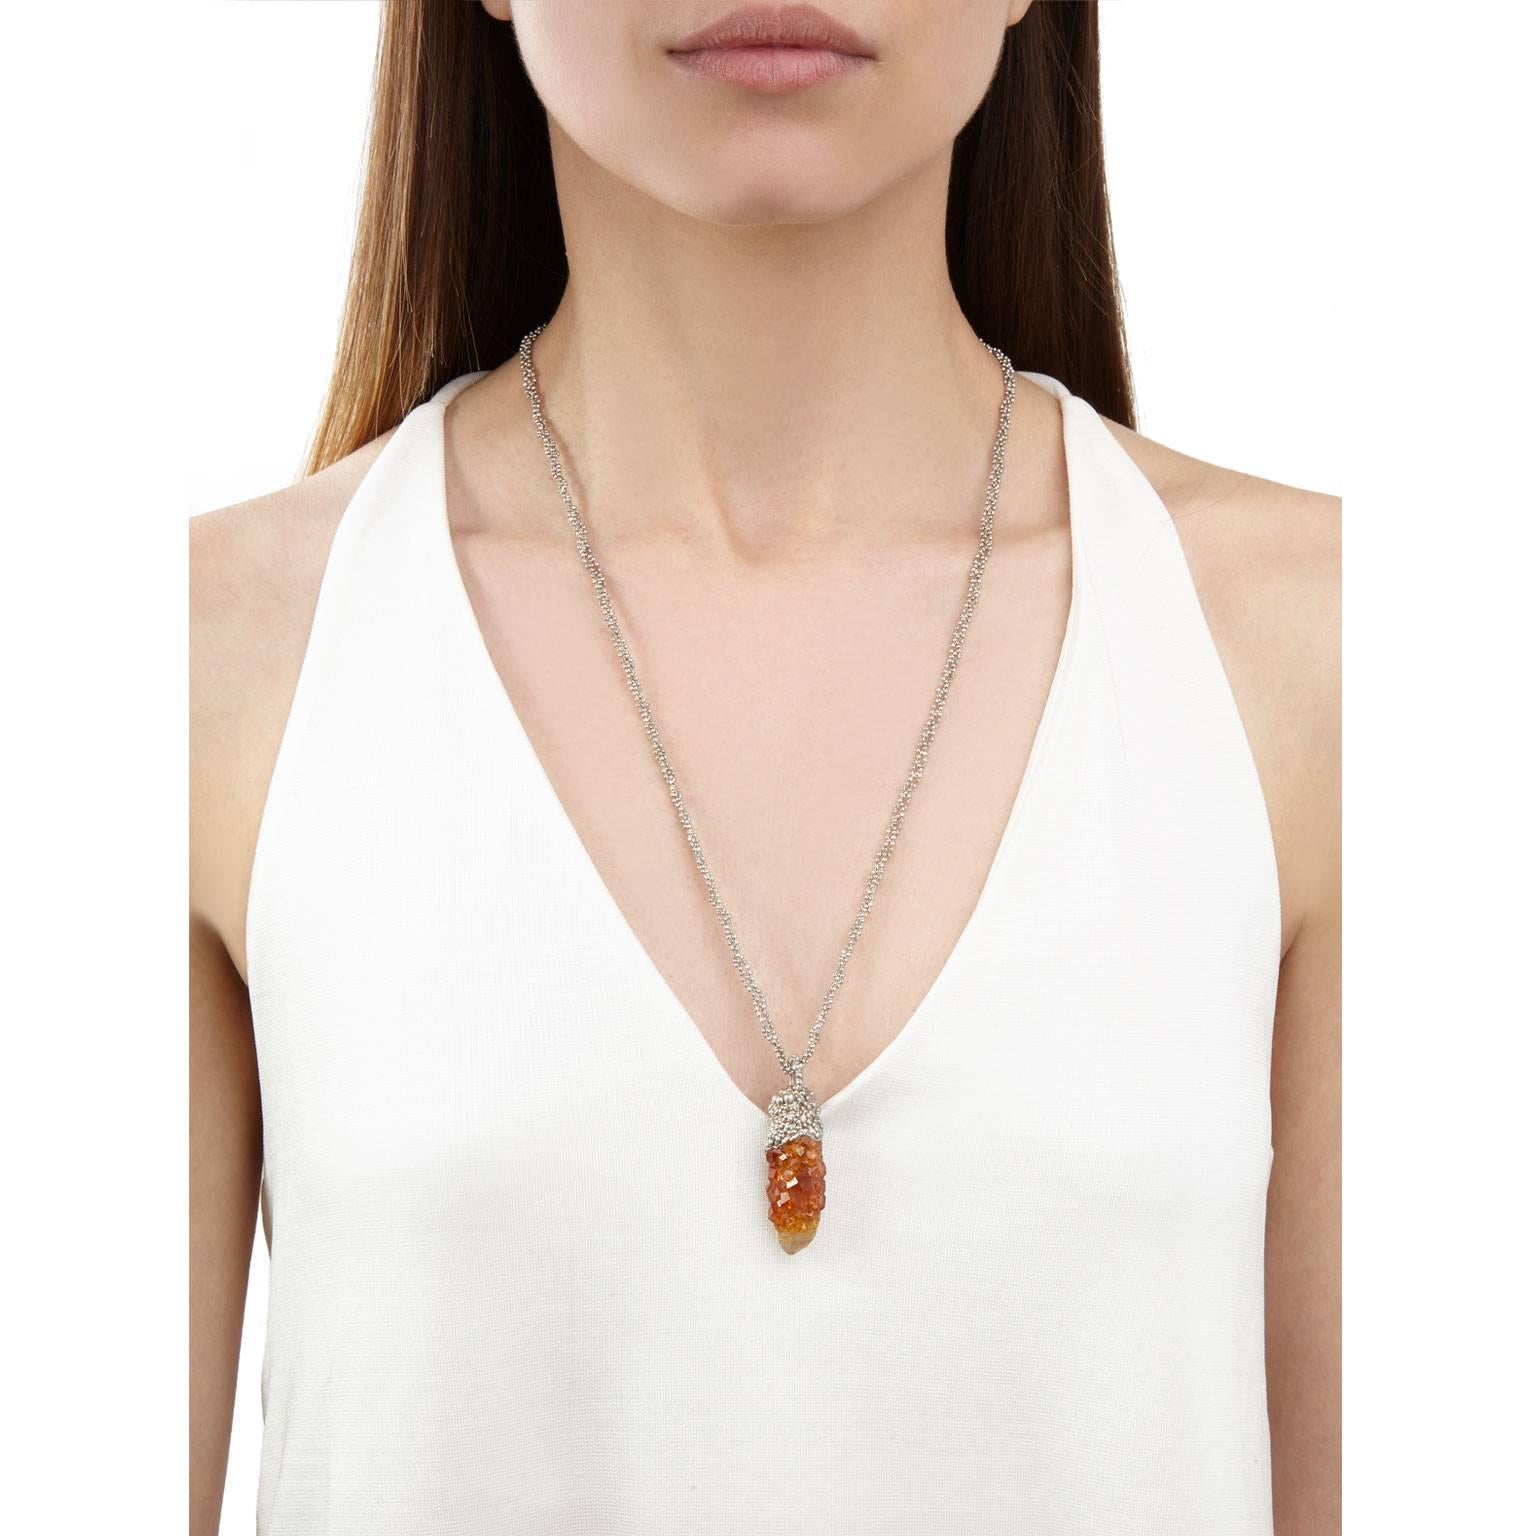 A beautiful one of a kind necklace featuring a cluster of vivid orange spessartine garnets which have grown over a quartz crystal, set in molten-like granules of silver. The pendant hangs from a plaited silver faceted ball chain.

Crystal